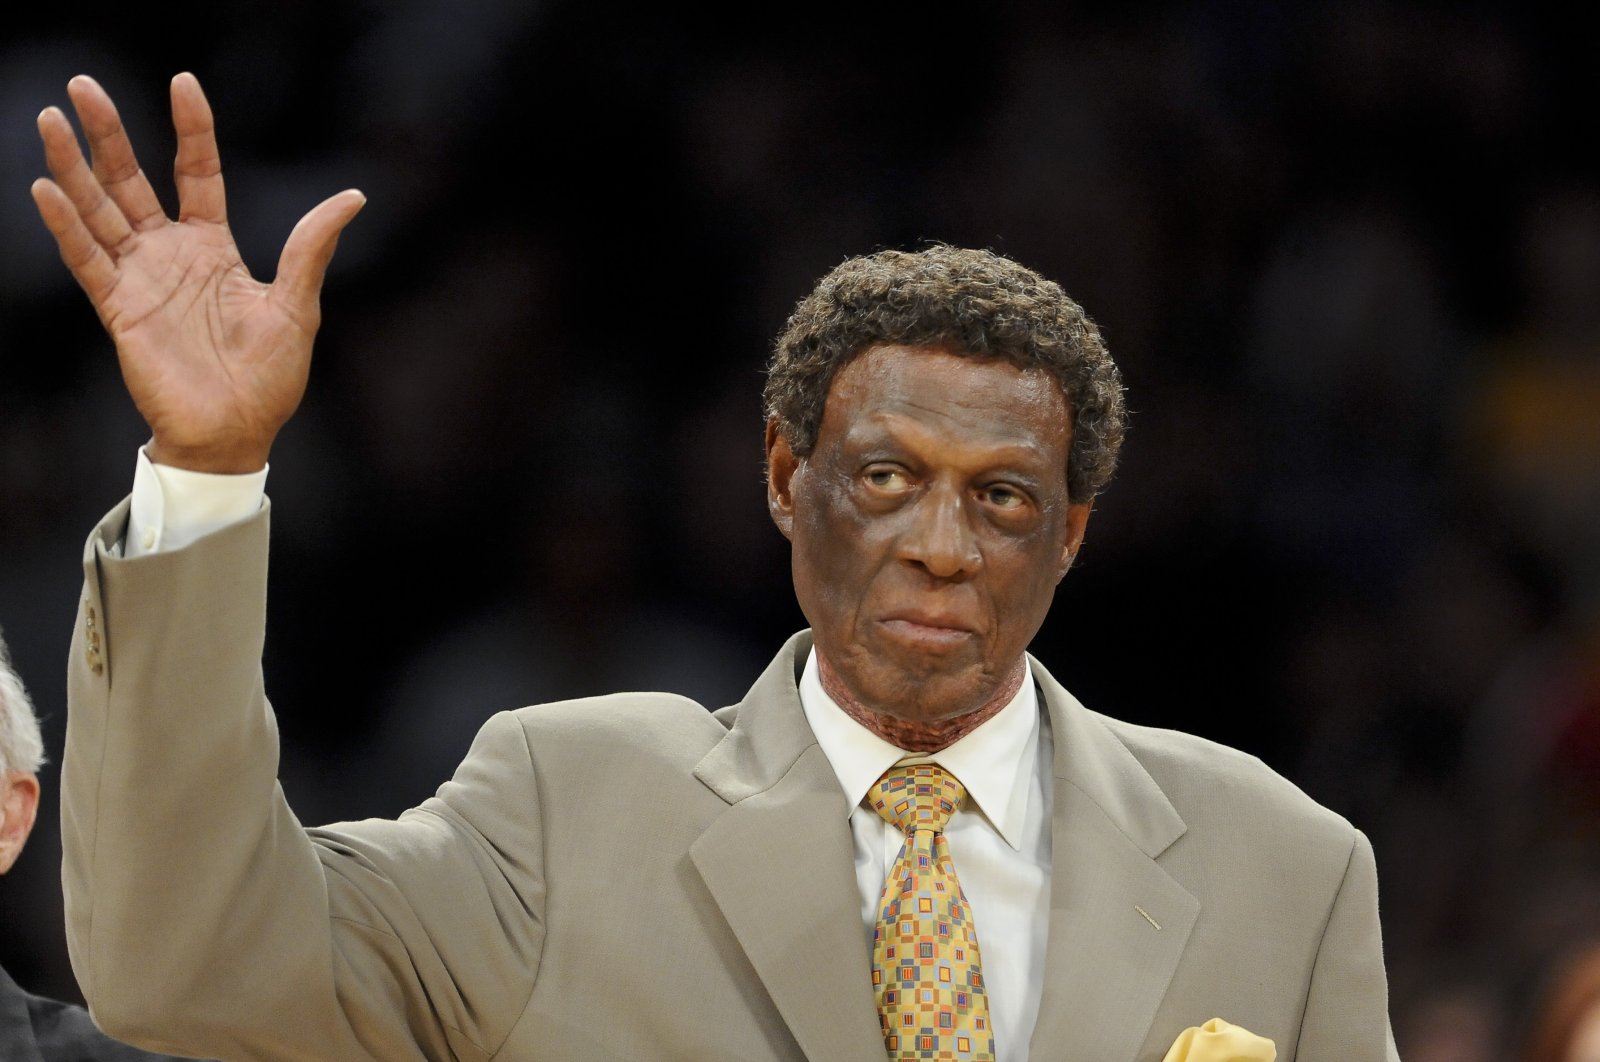 Elgin Baylor waves as he is honored along with other members of the 1974 Los Angeles Lakers Championship team, at half time of an NBA basketball game between the Houston Rockets and the Lakers in Los Angeles, U.S., April 6, 2012. (AP Photo)